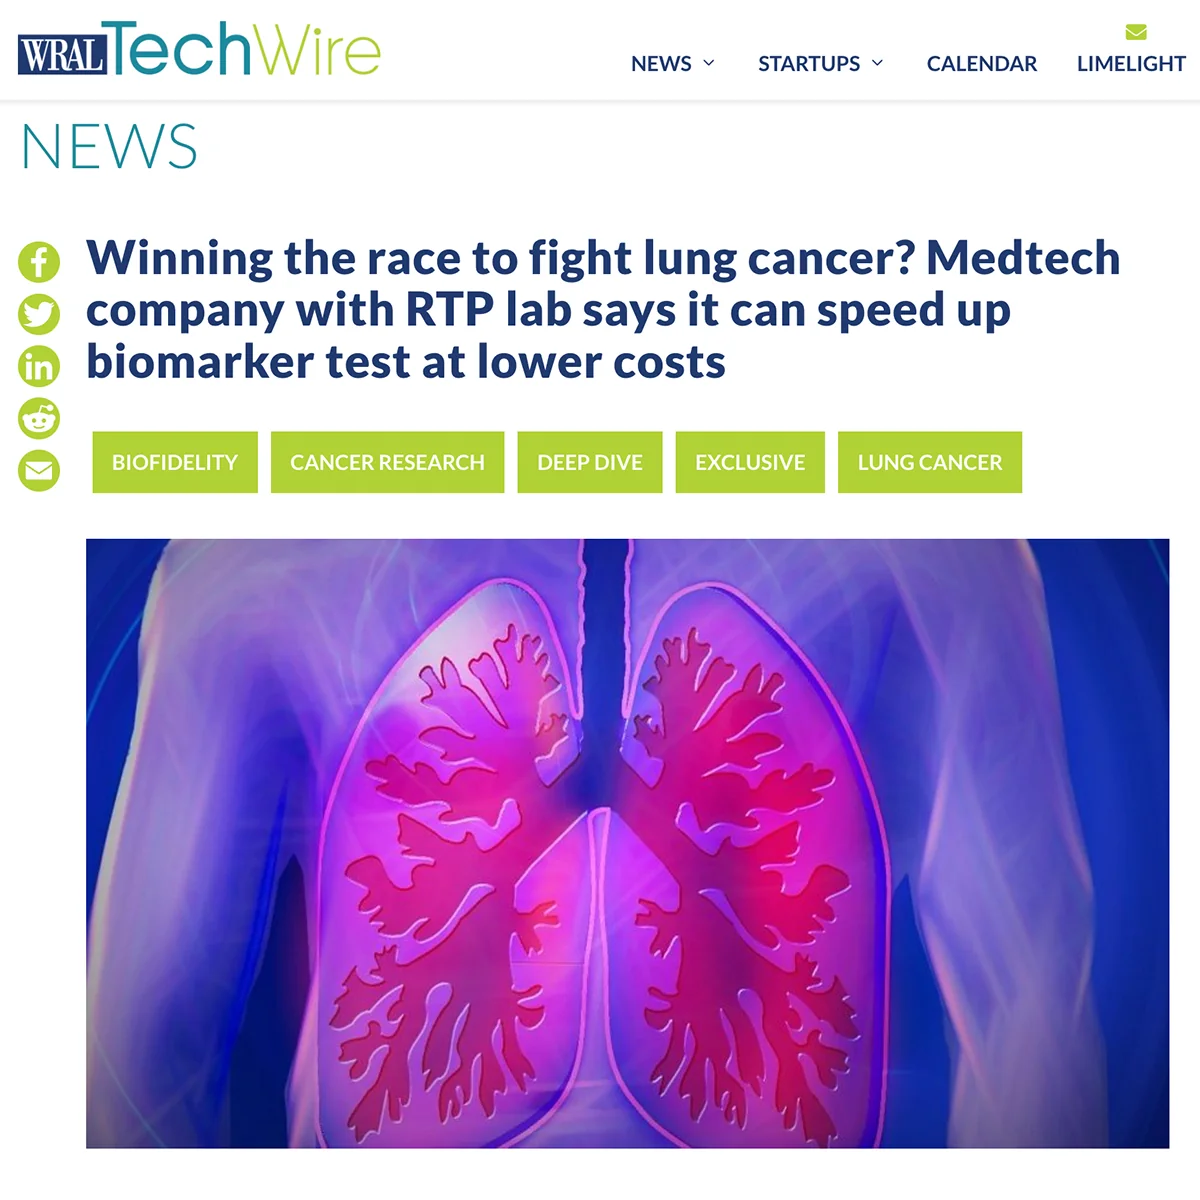 Winning the race to fight lung cancer? Medtech company with RTP lab says it can speed up biomarker test at lower costs